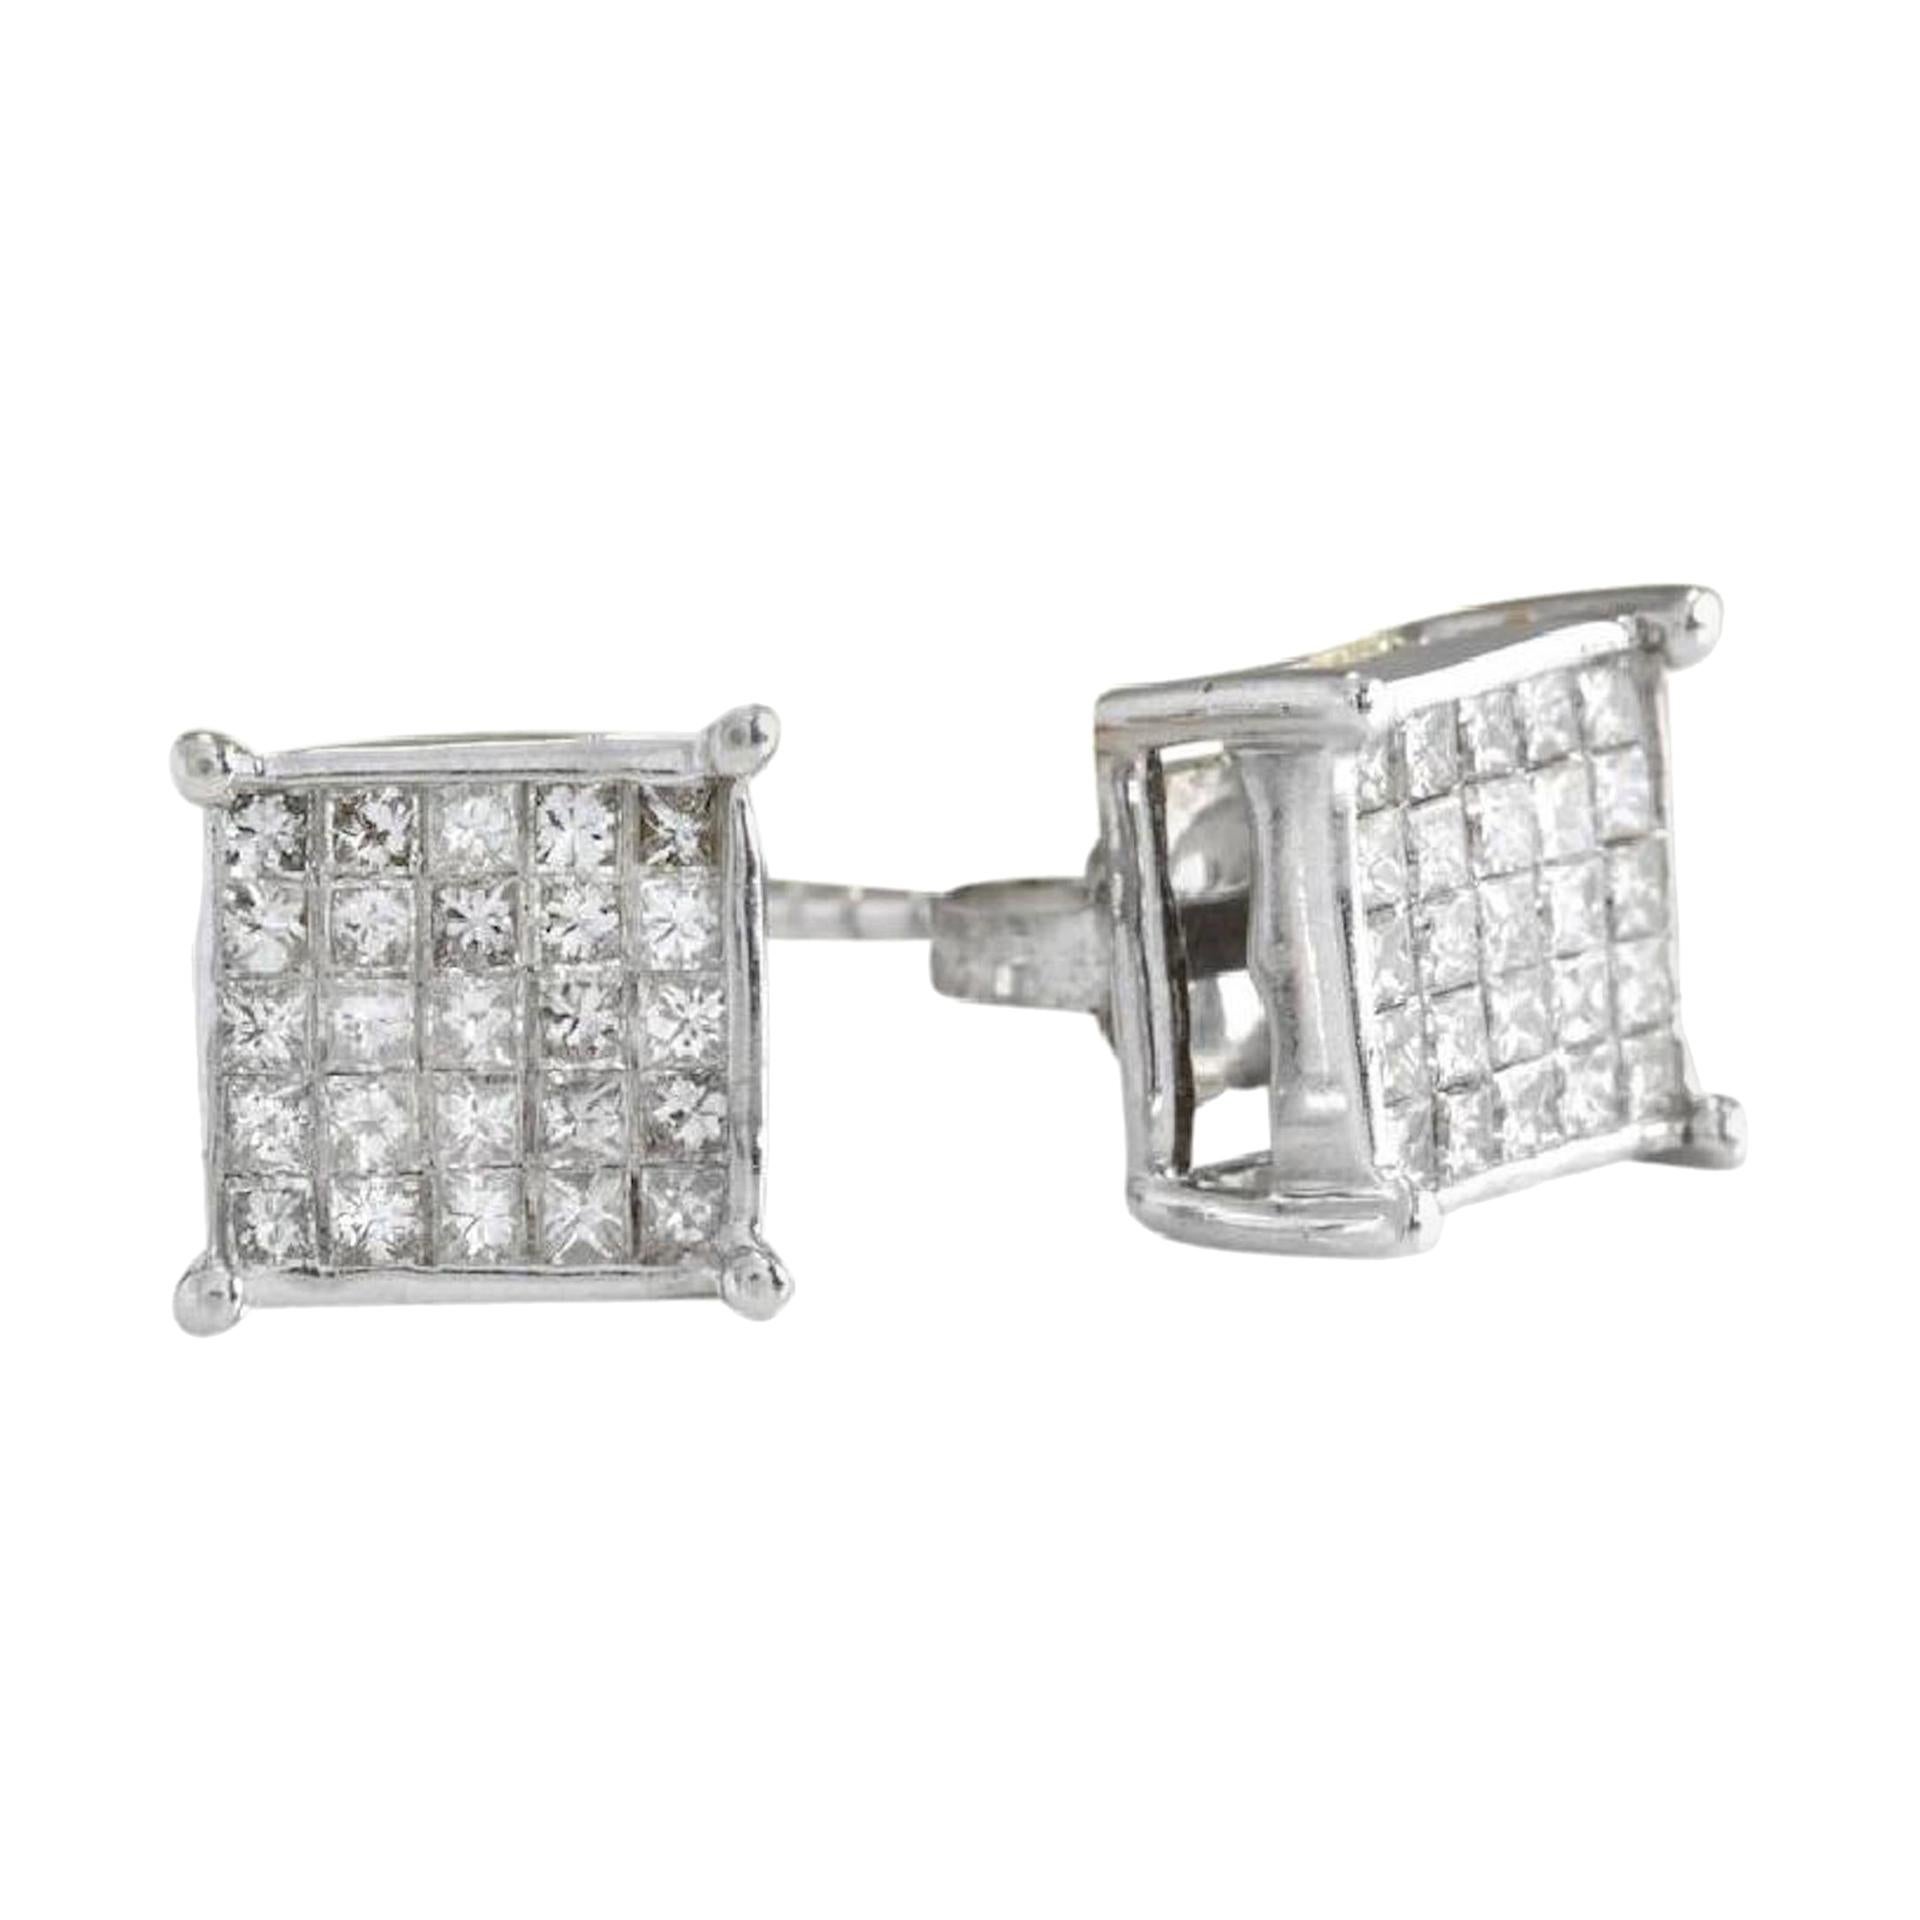 Exquisite 1.25 Carat Natural Diamond 14 Karat Solid White Gold Stud Earrings For Sale